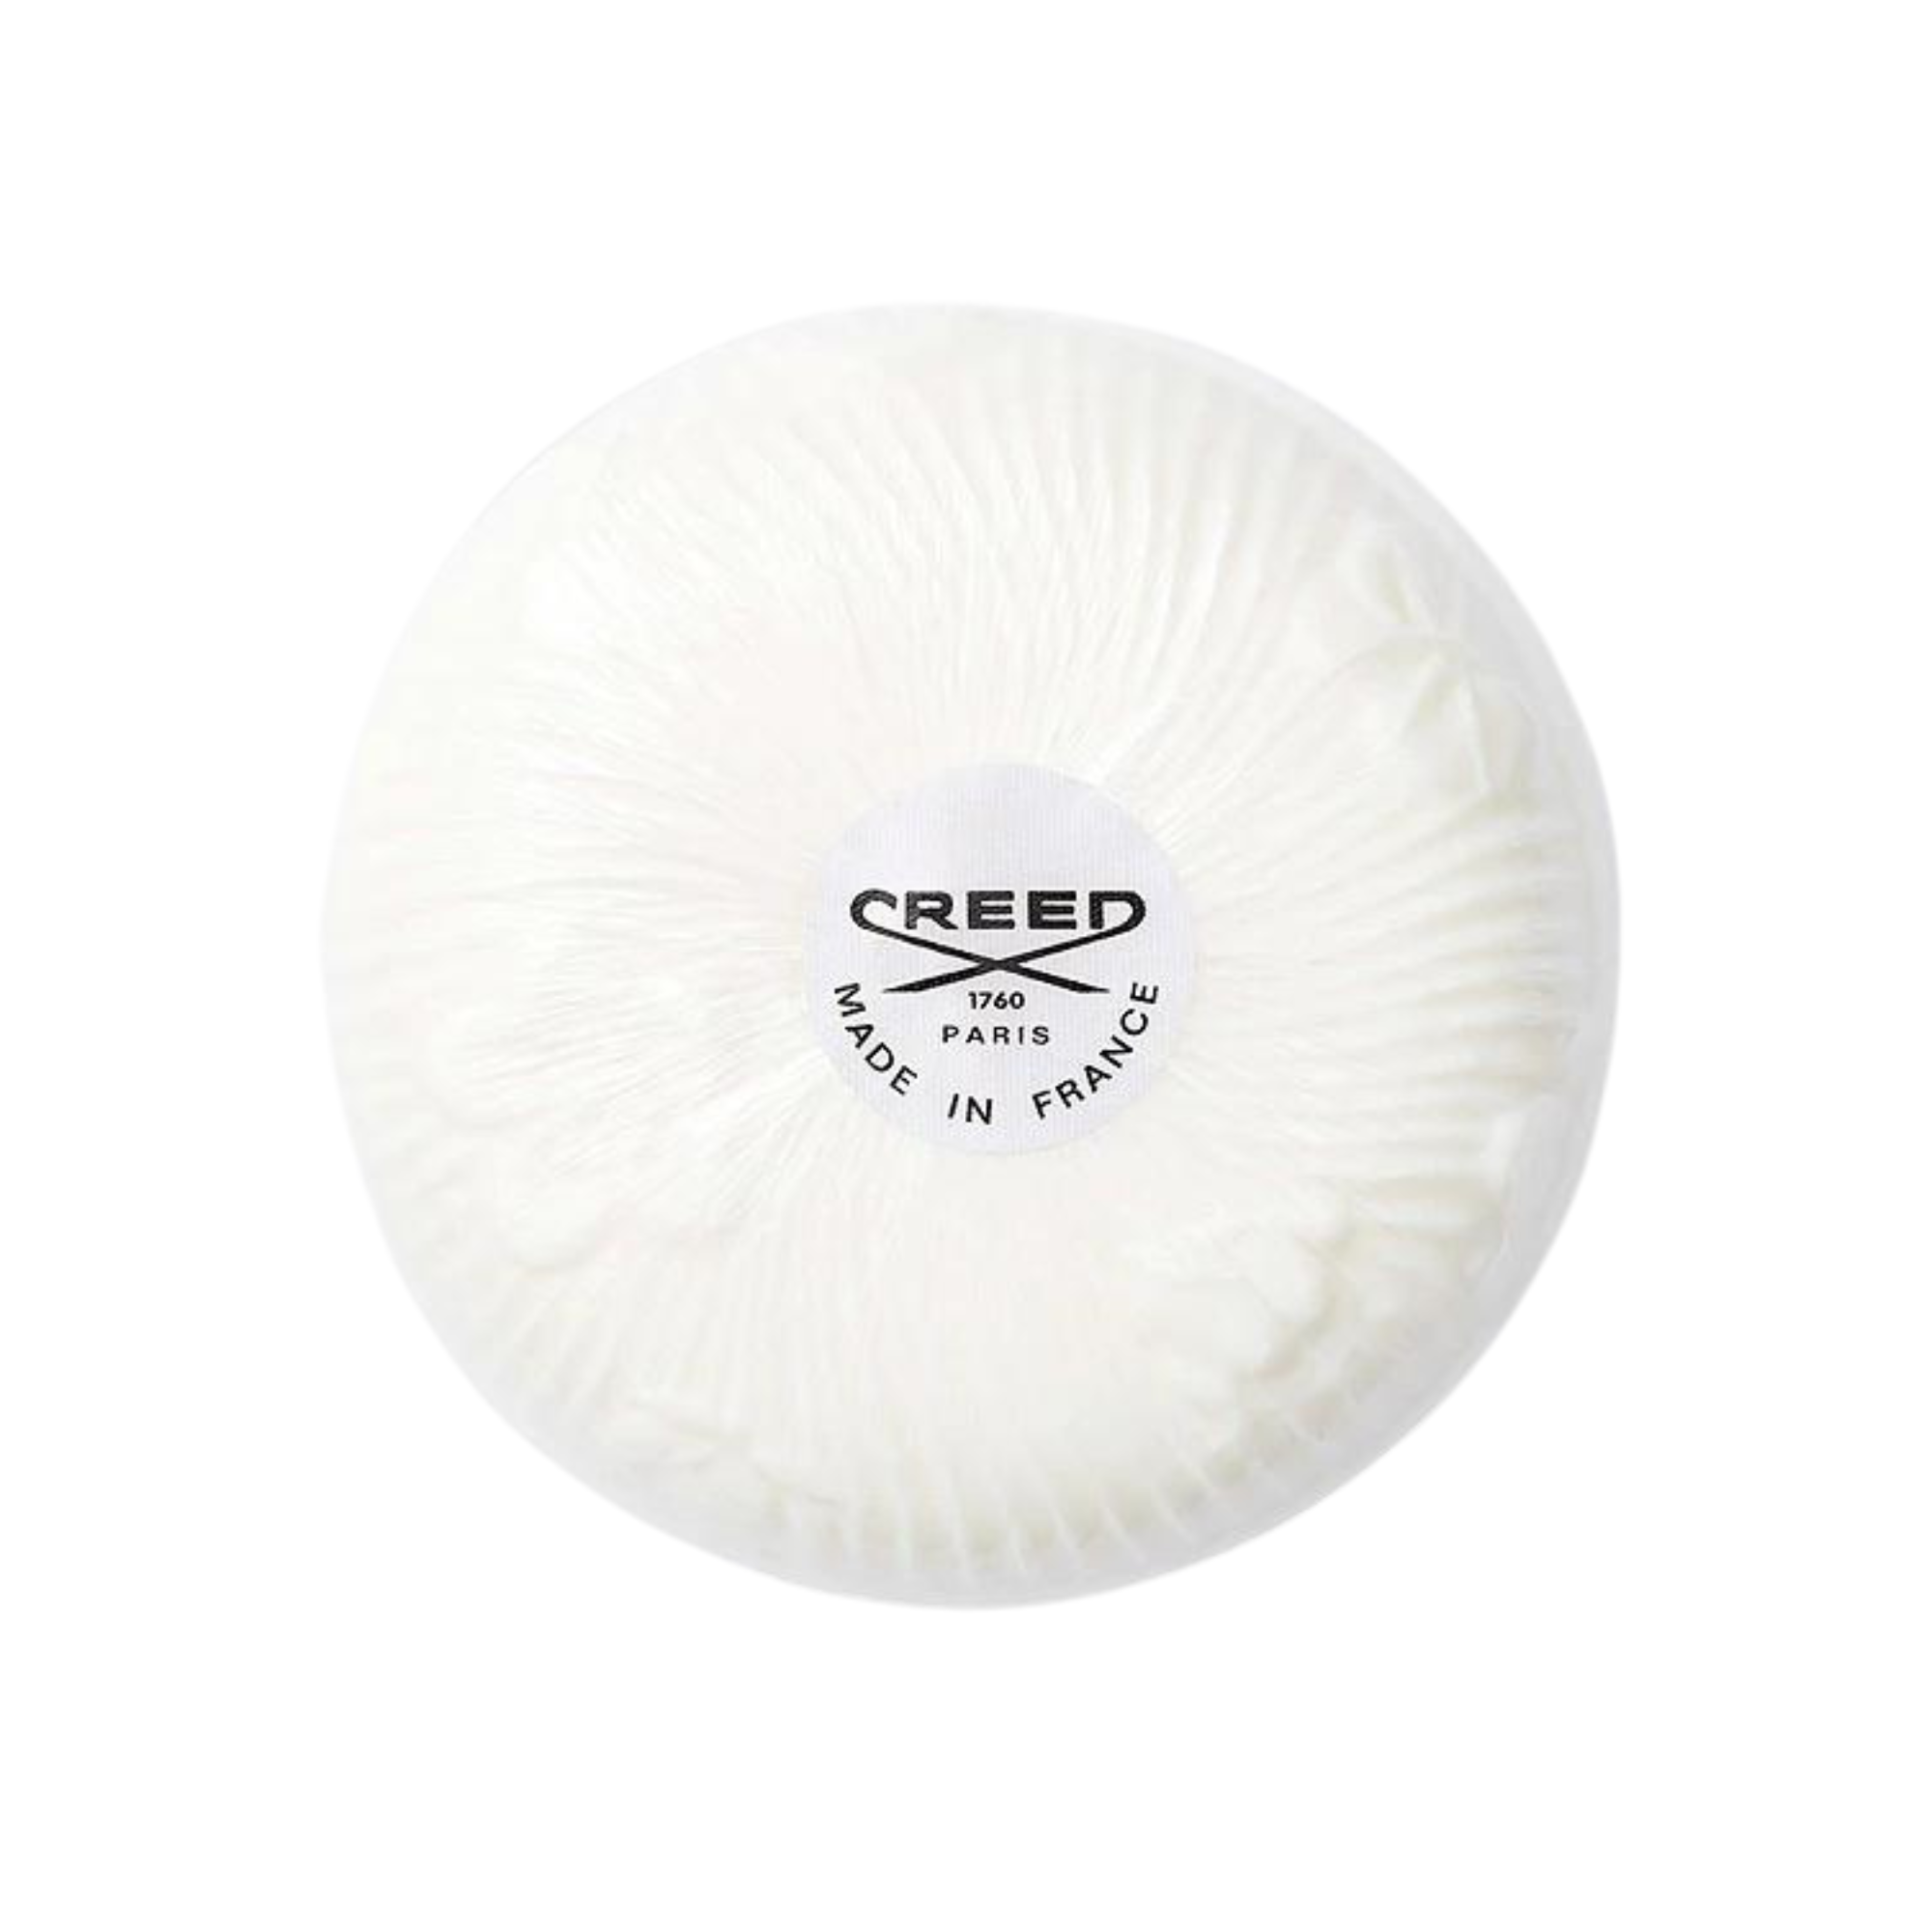 CREED AVENTUS FOR HER SOAP